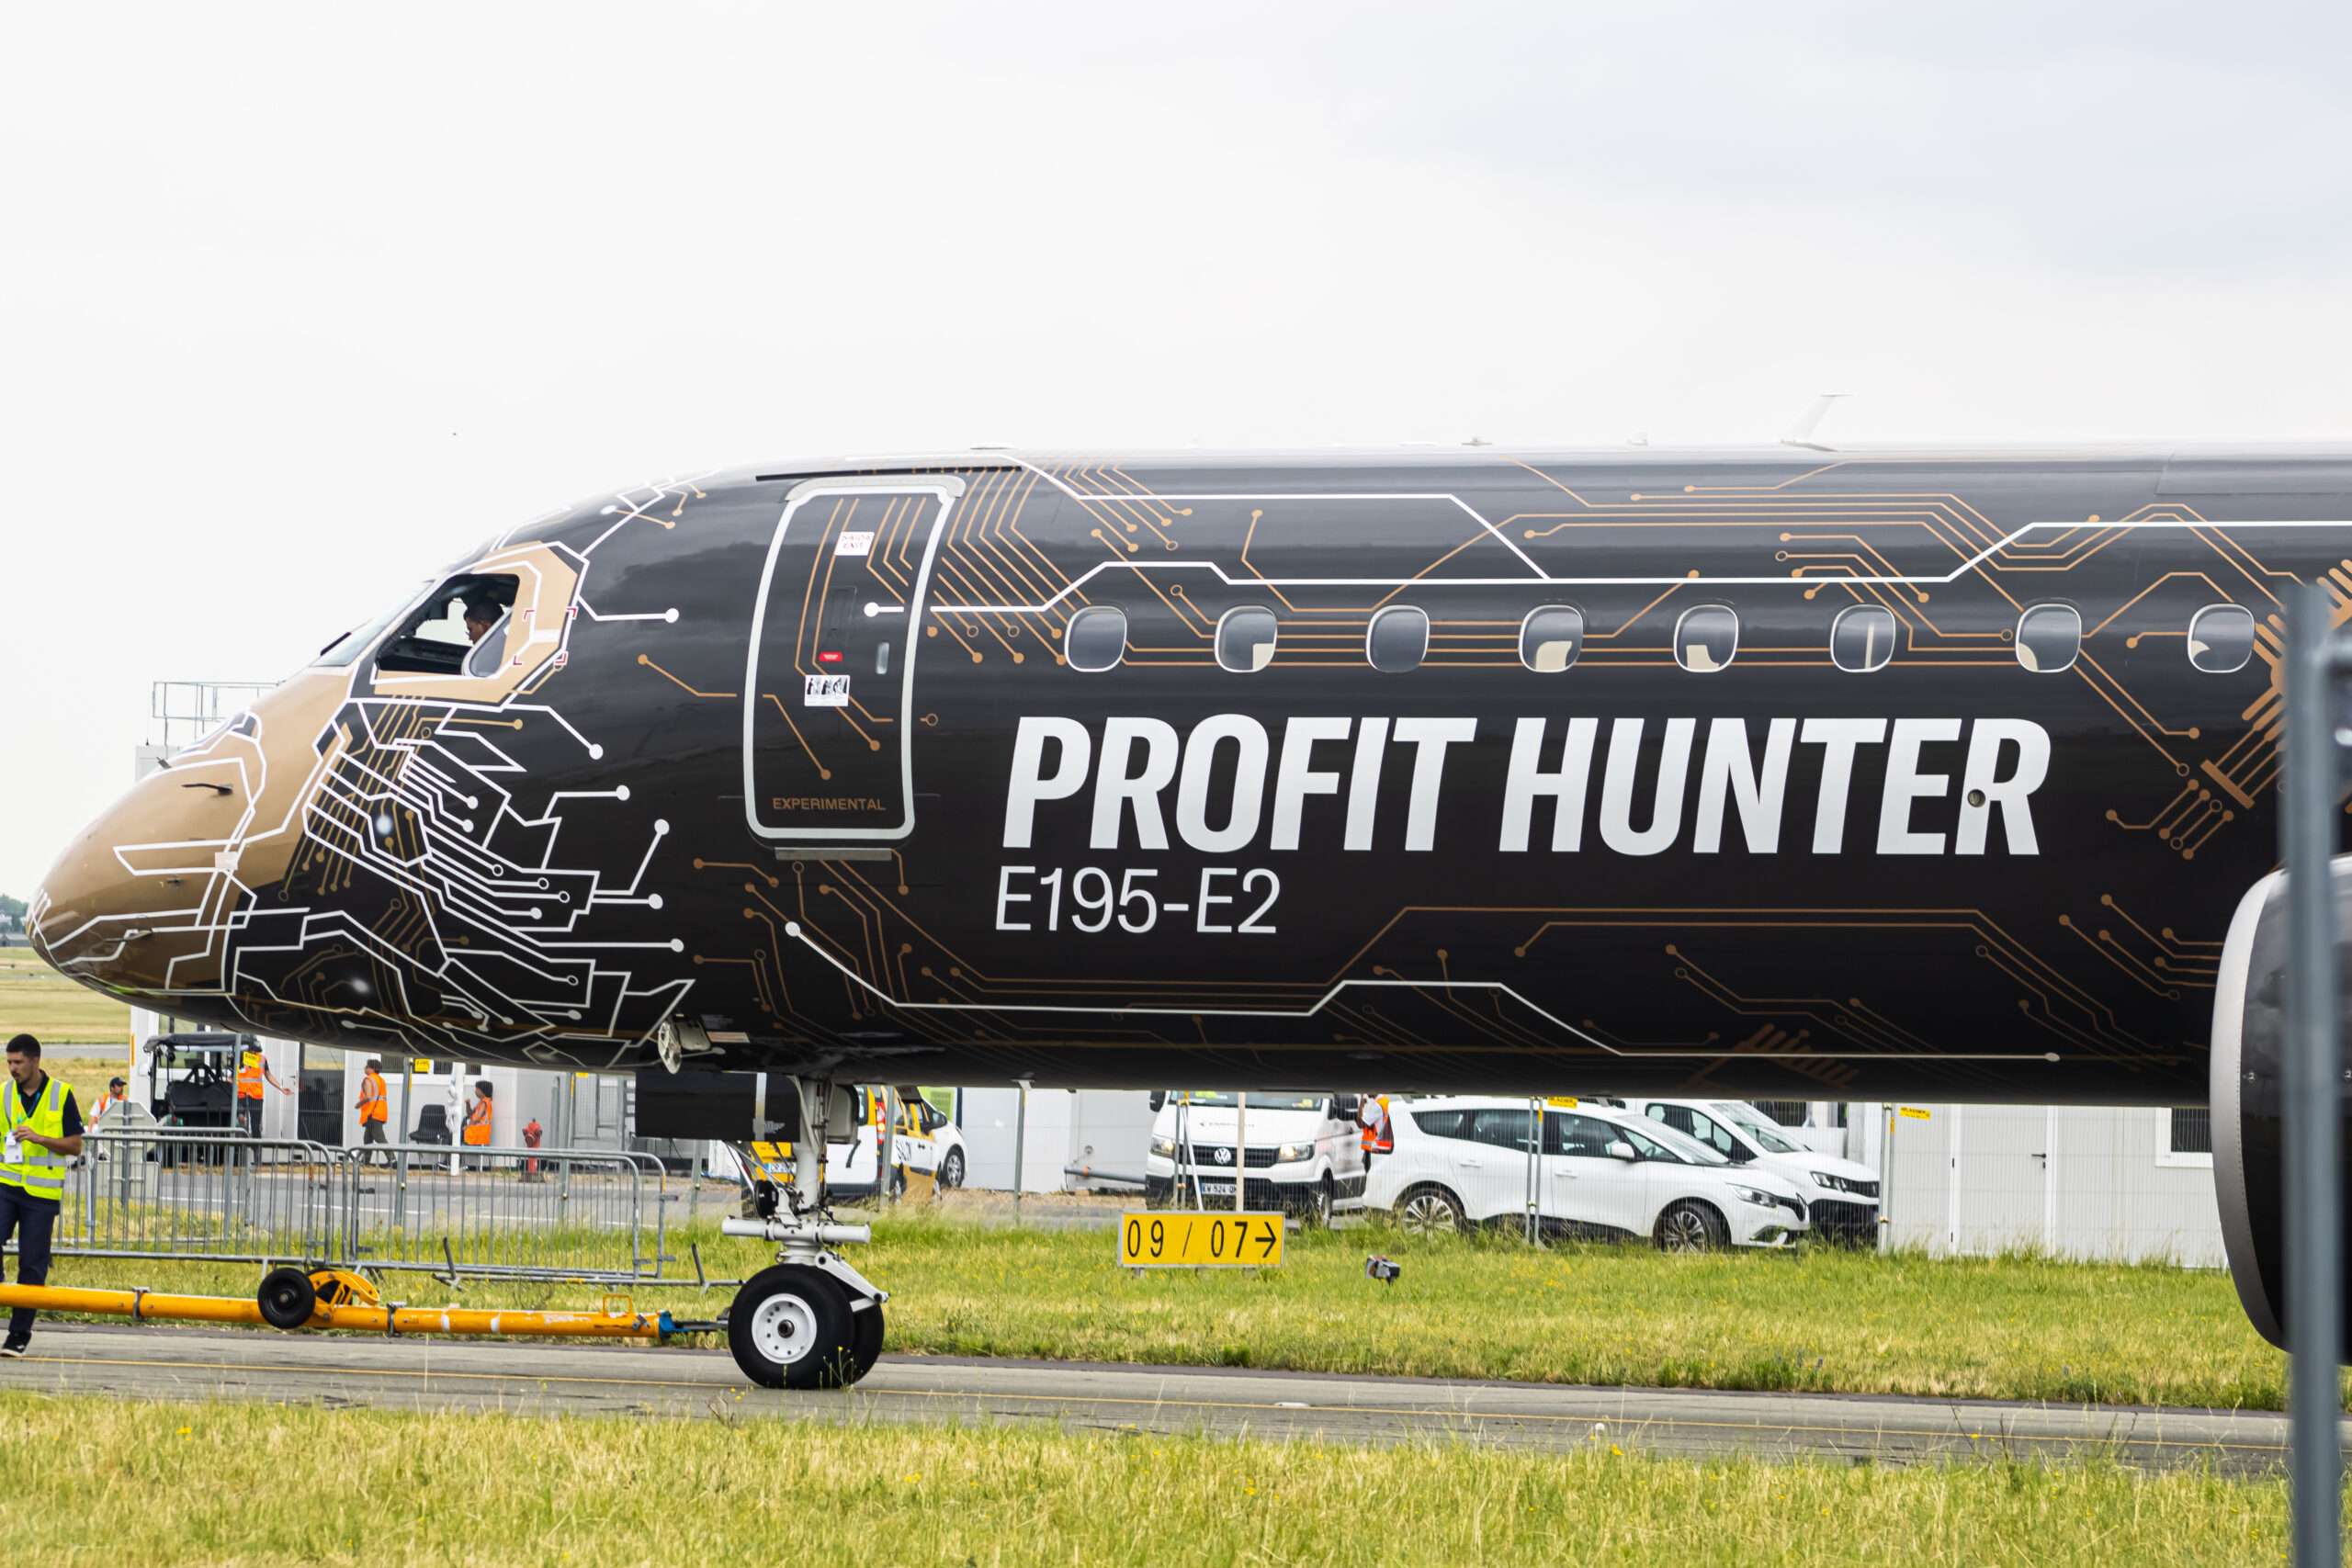 Dubai Air Show: Embraer Will Want to Push E2 Sales Further